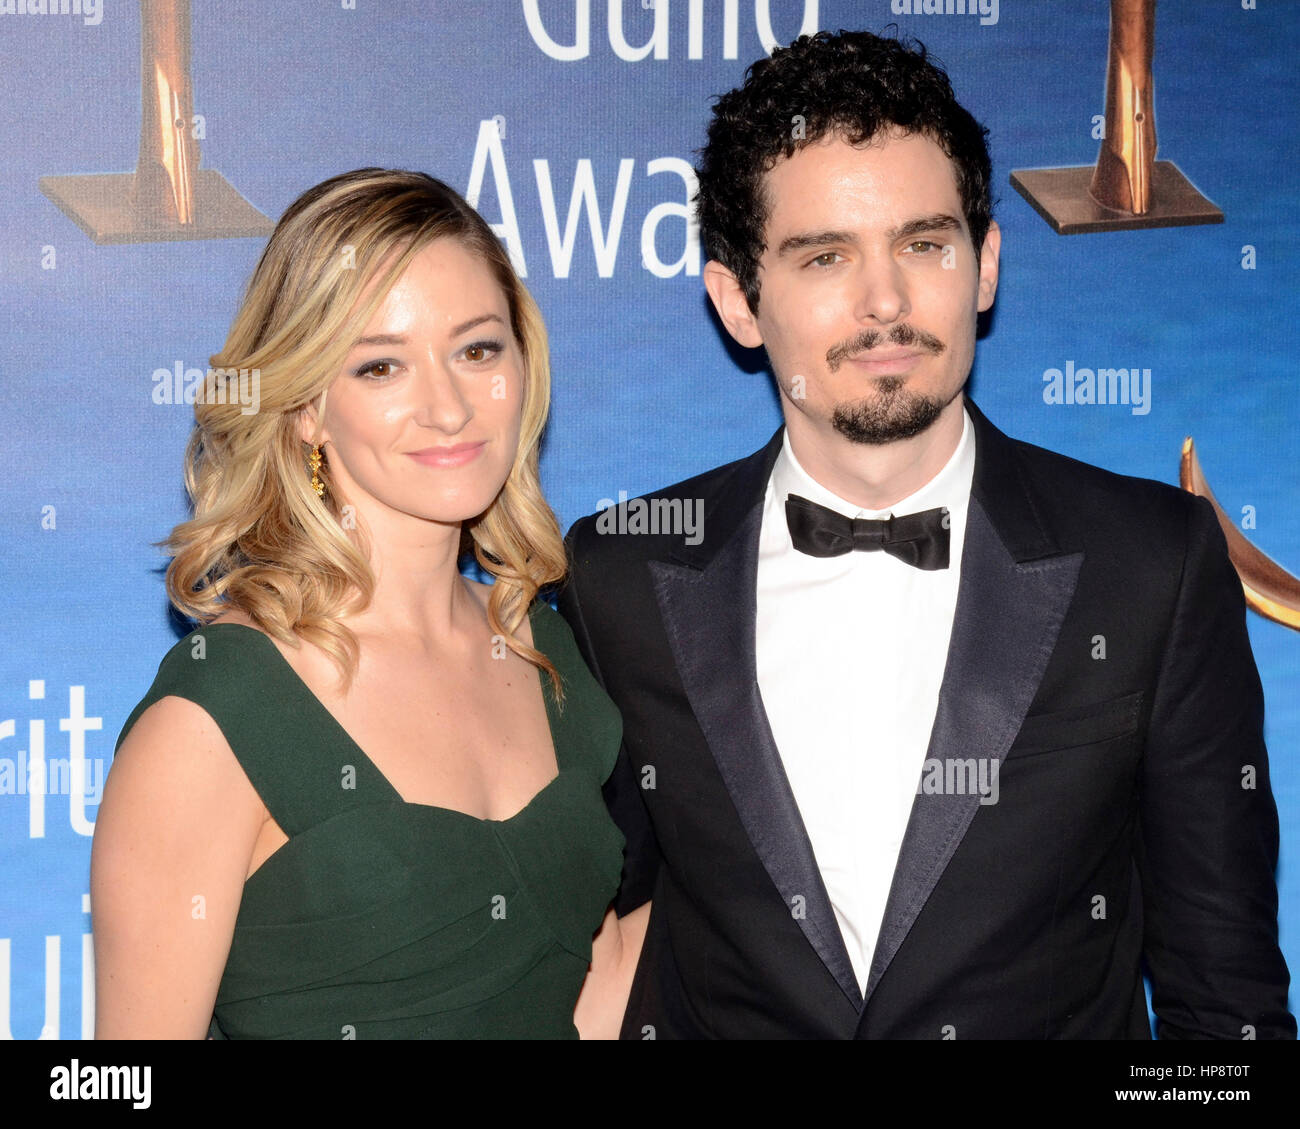 Beverly Hills, USA. 19th Feb, 2017. Damien Chazzell and Olivia Hamilton attend the 2017 Writers Guild Awards L.A. Ceremony at The Beverly Hilton Hotel in Beverly Hills, California on February 19, 2017. Credit: The Photo Access/Alamy Live News Stock Photo